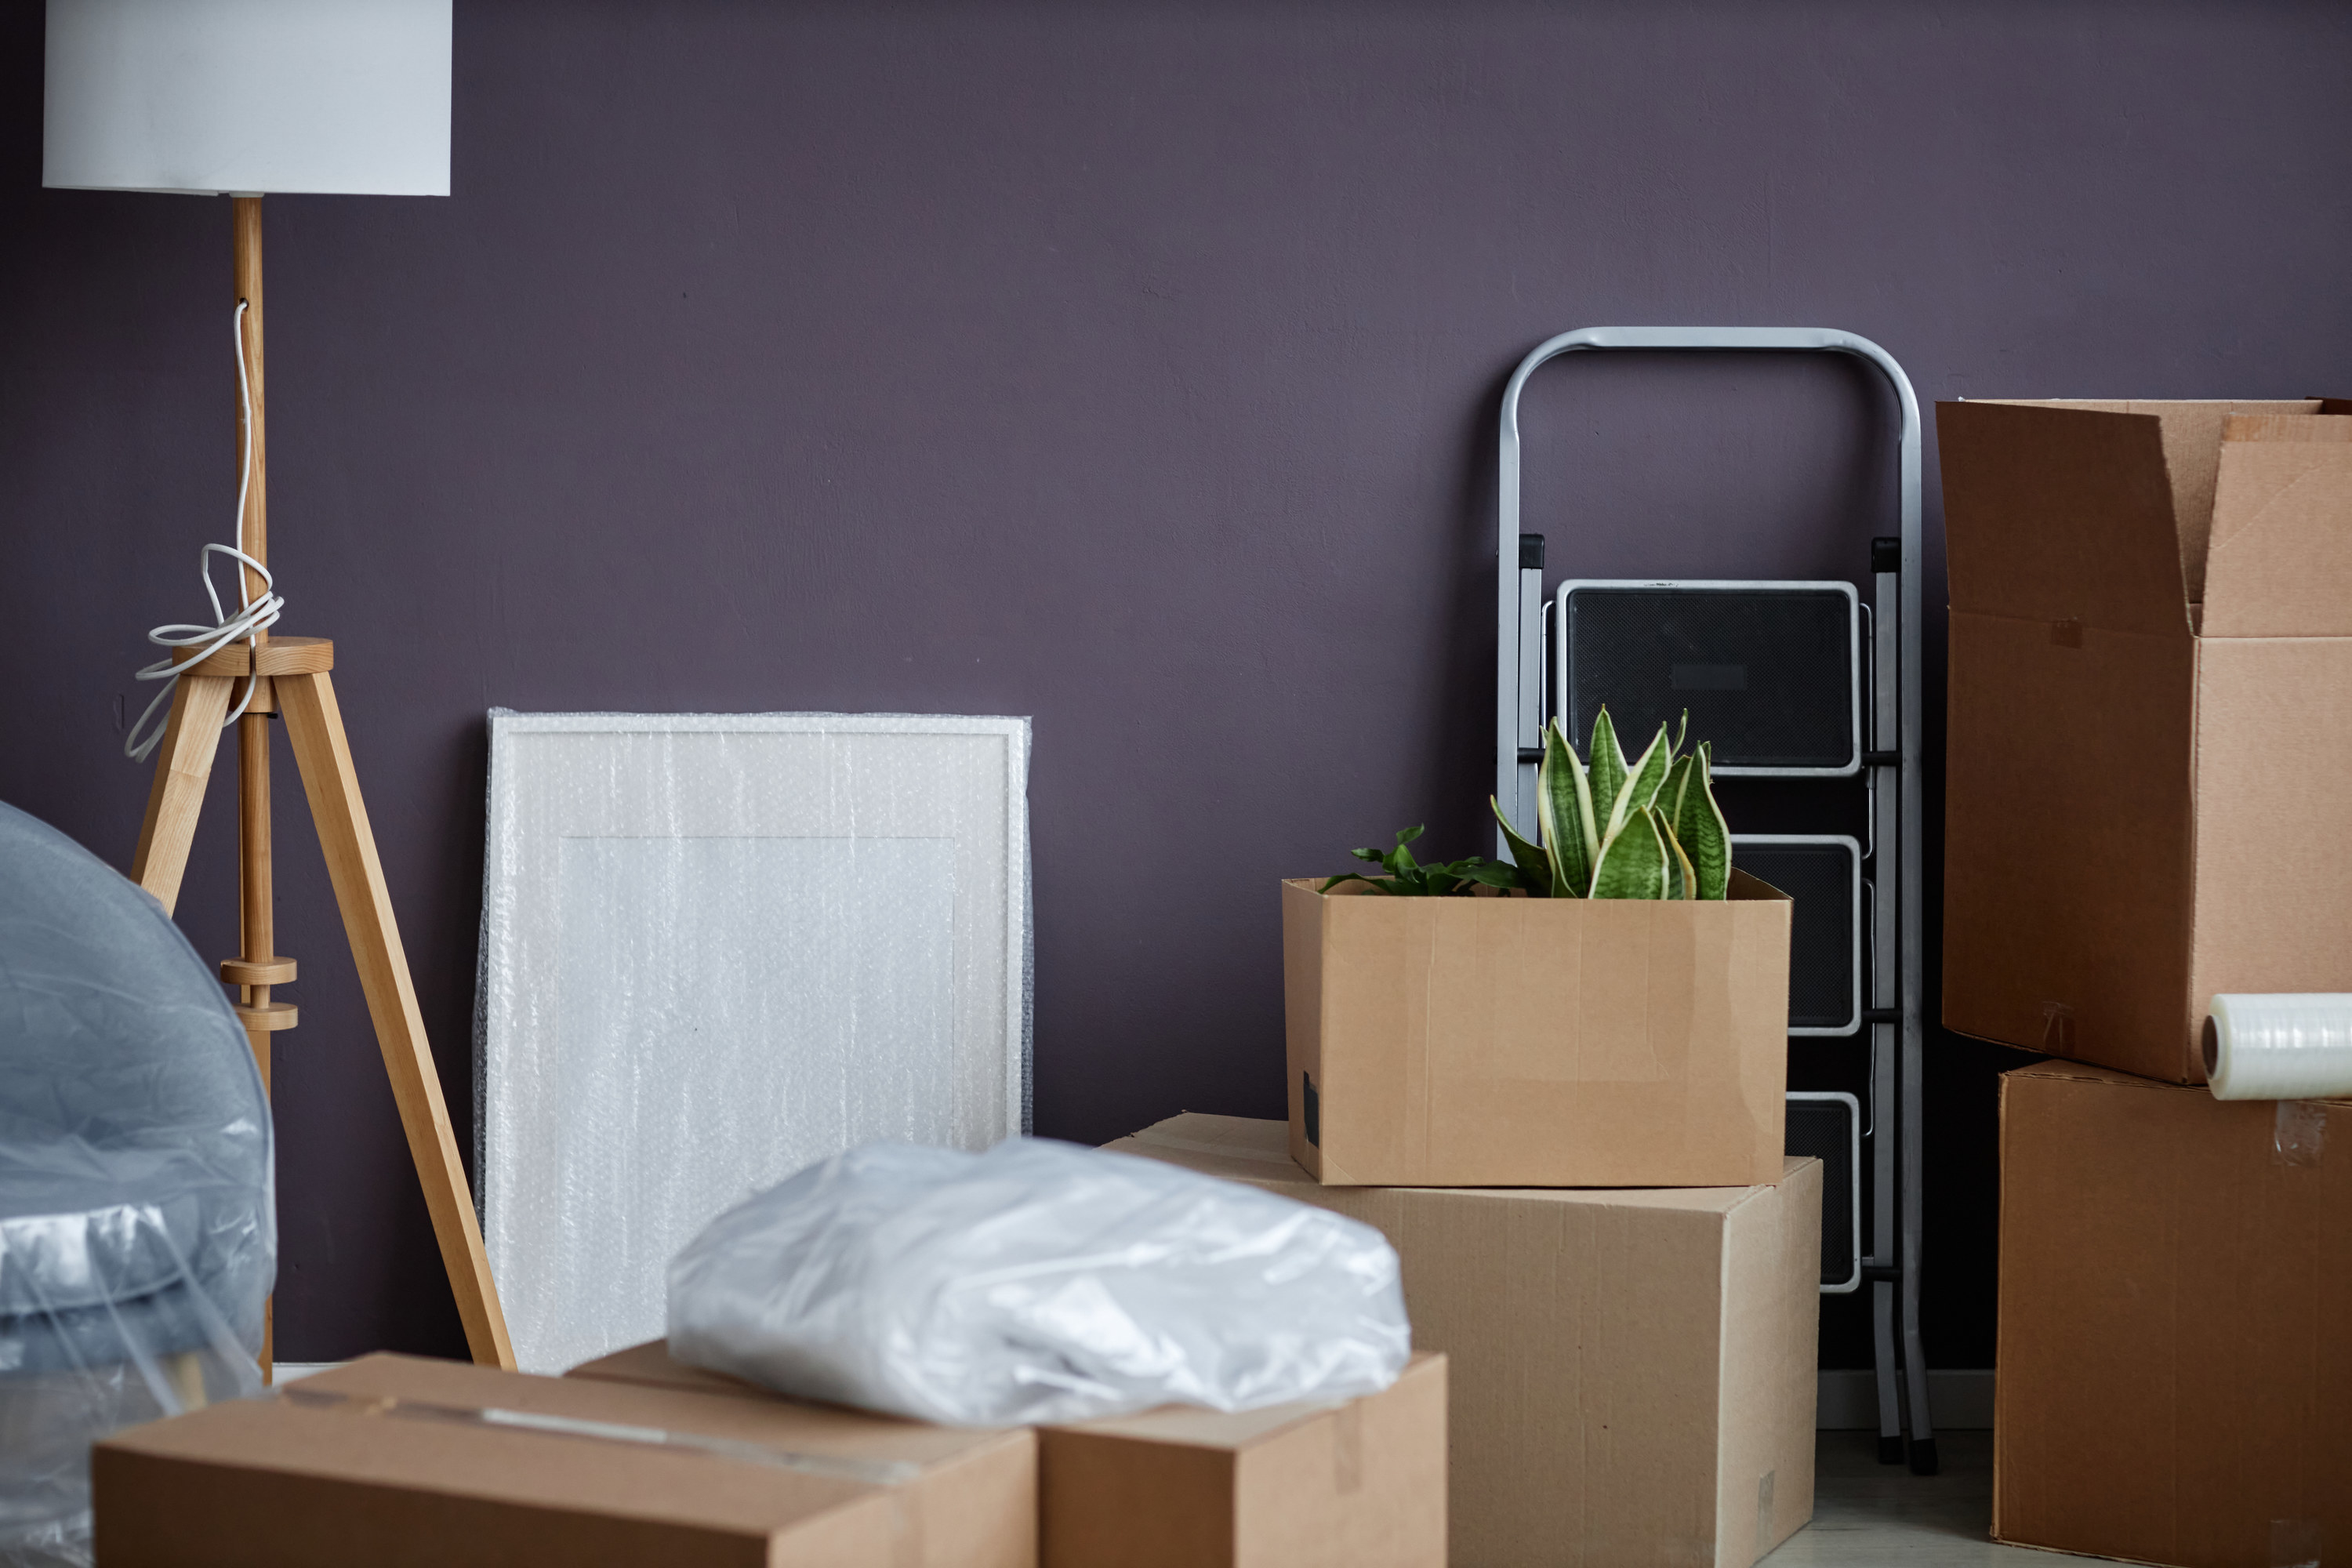 Moving boxes against a purple wall in an apartment